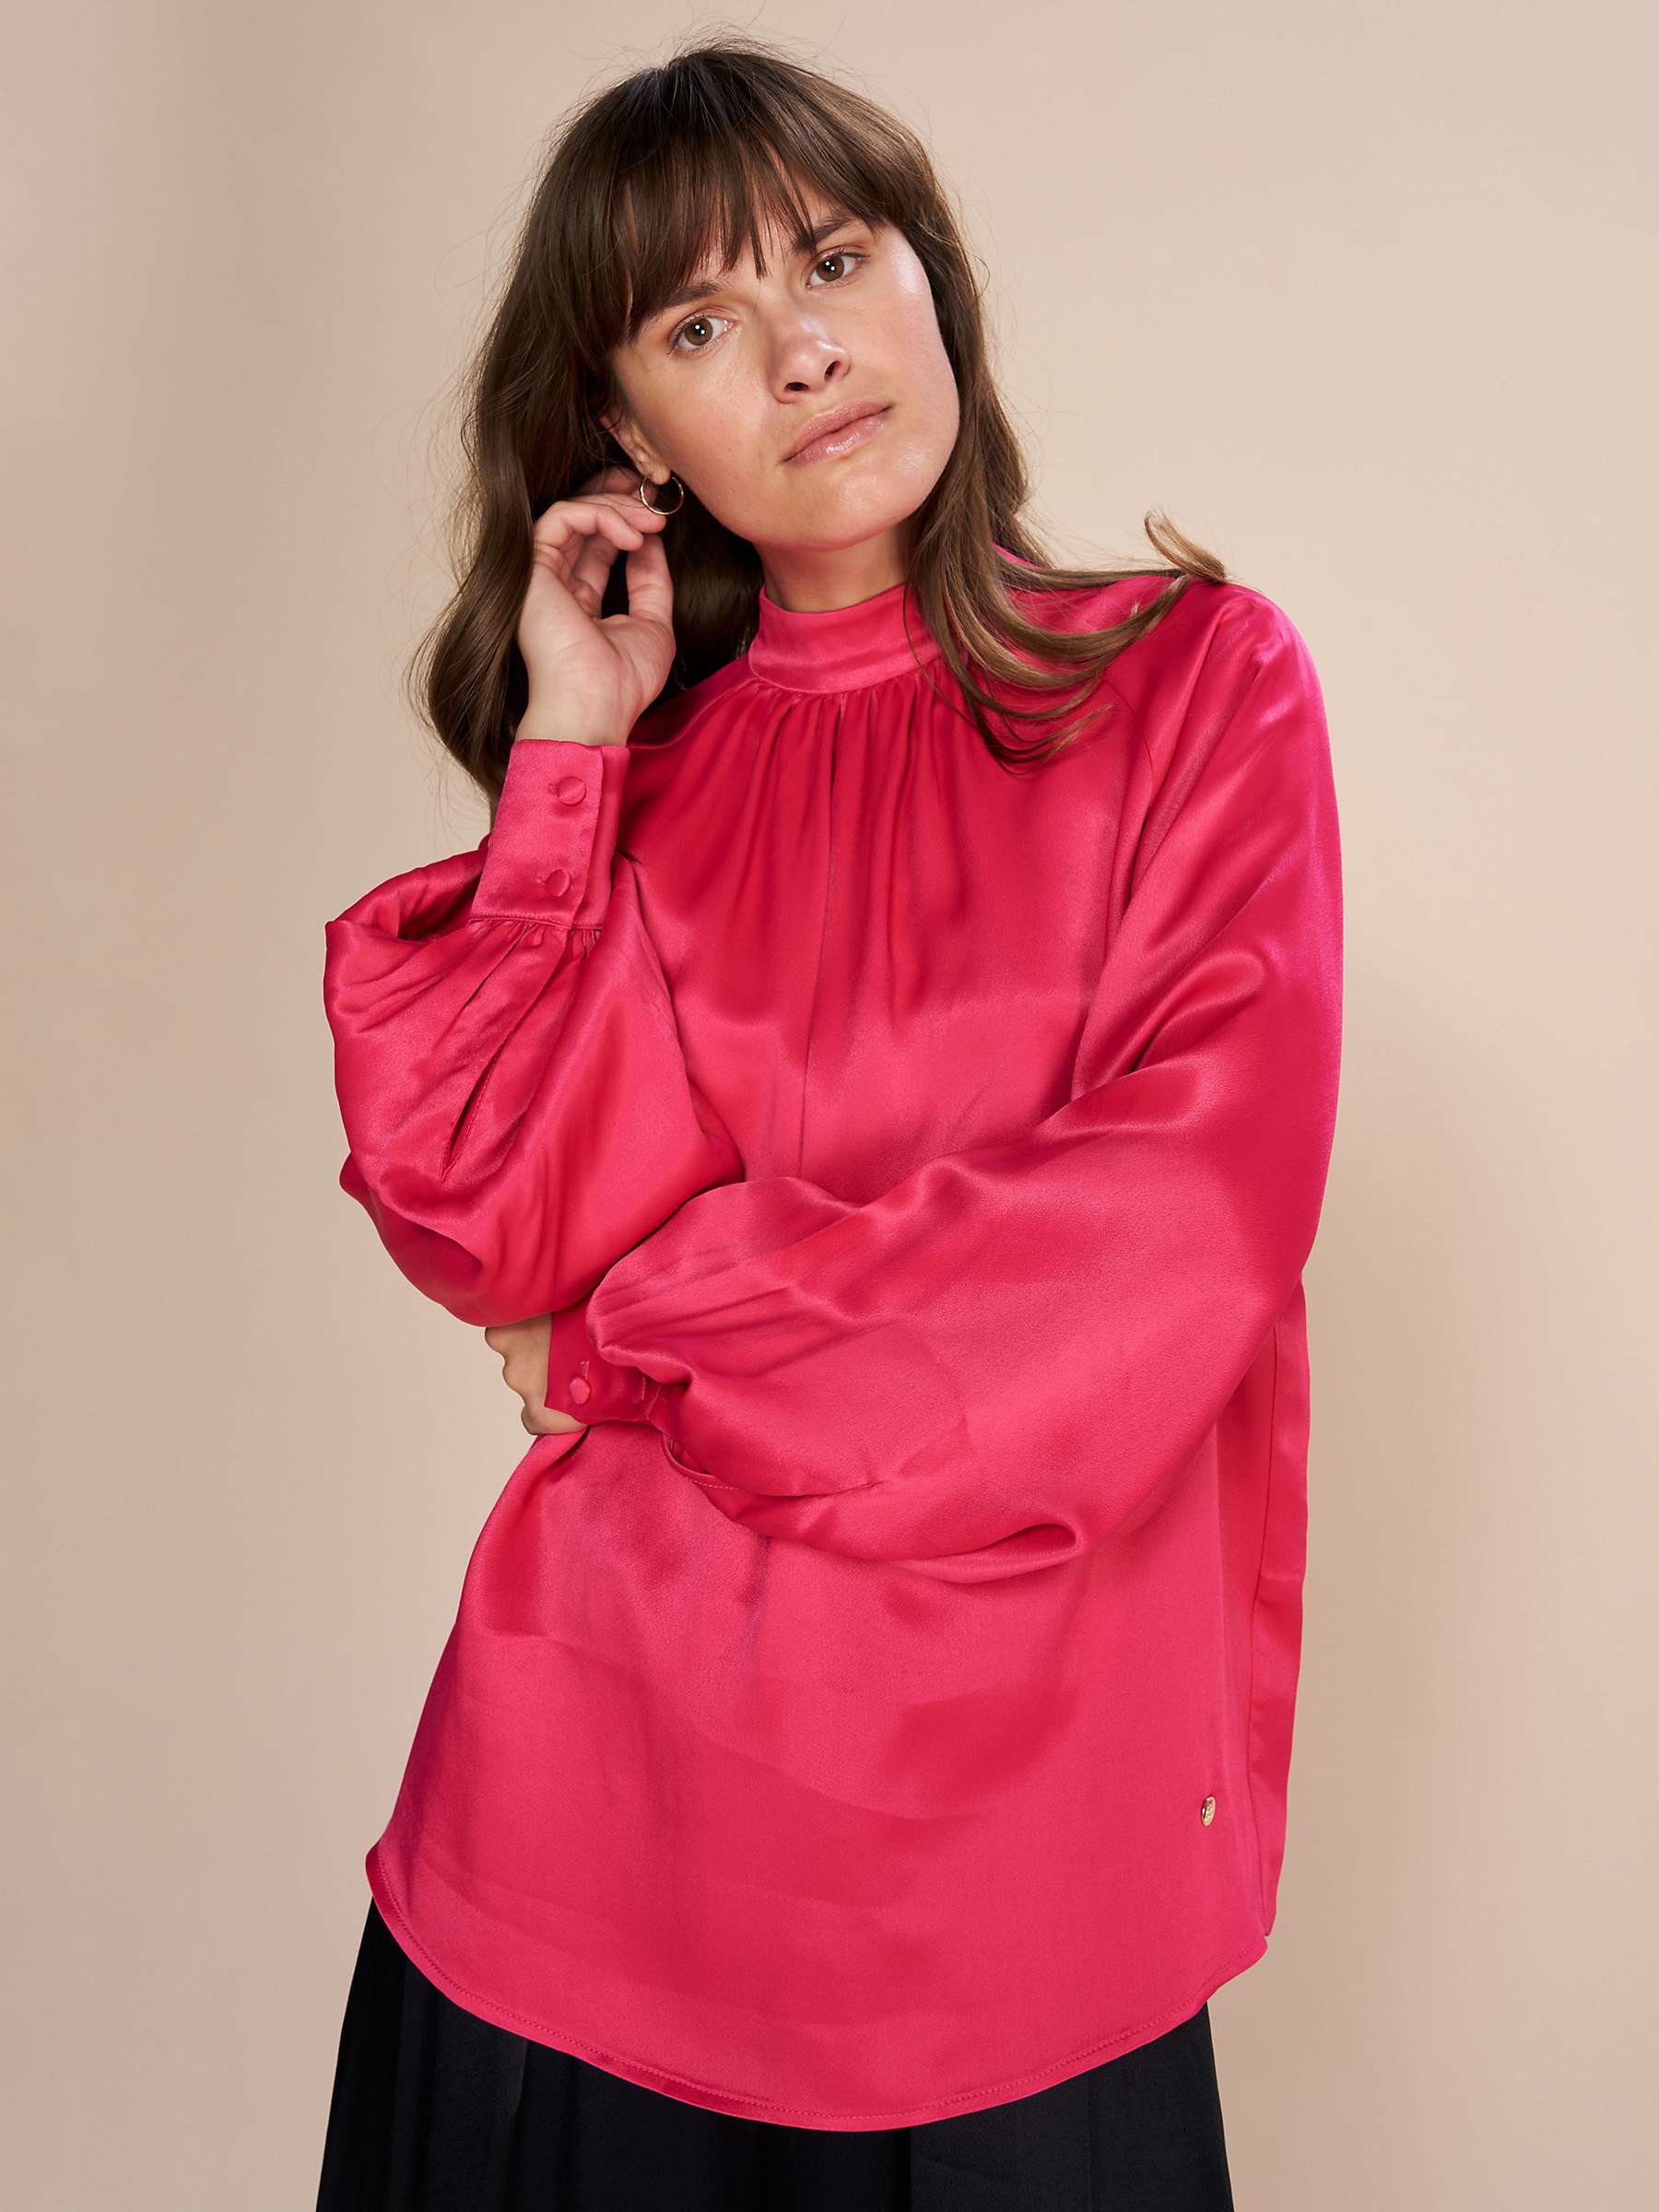 Buy MOS MOSH Sille Glossy Blouse, Bright Rose Online at johnlewis.com